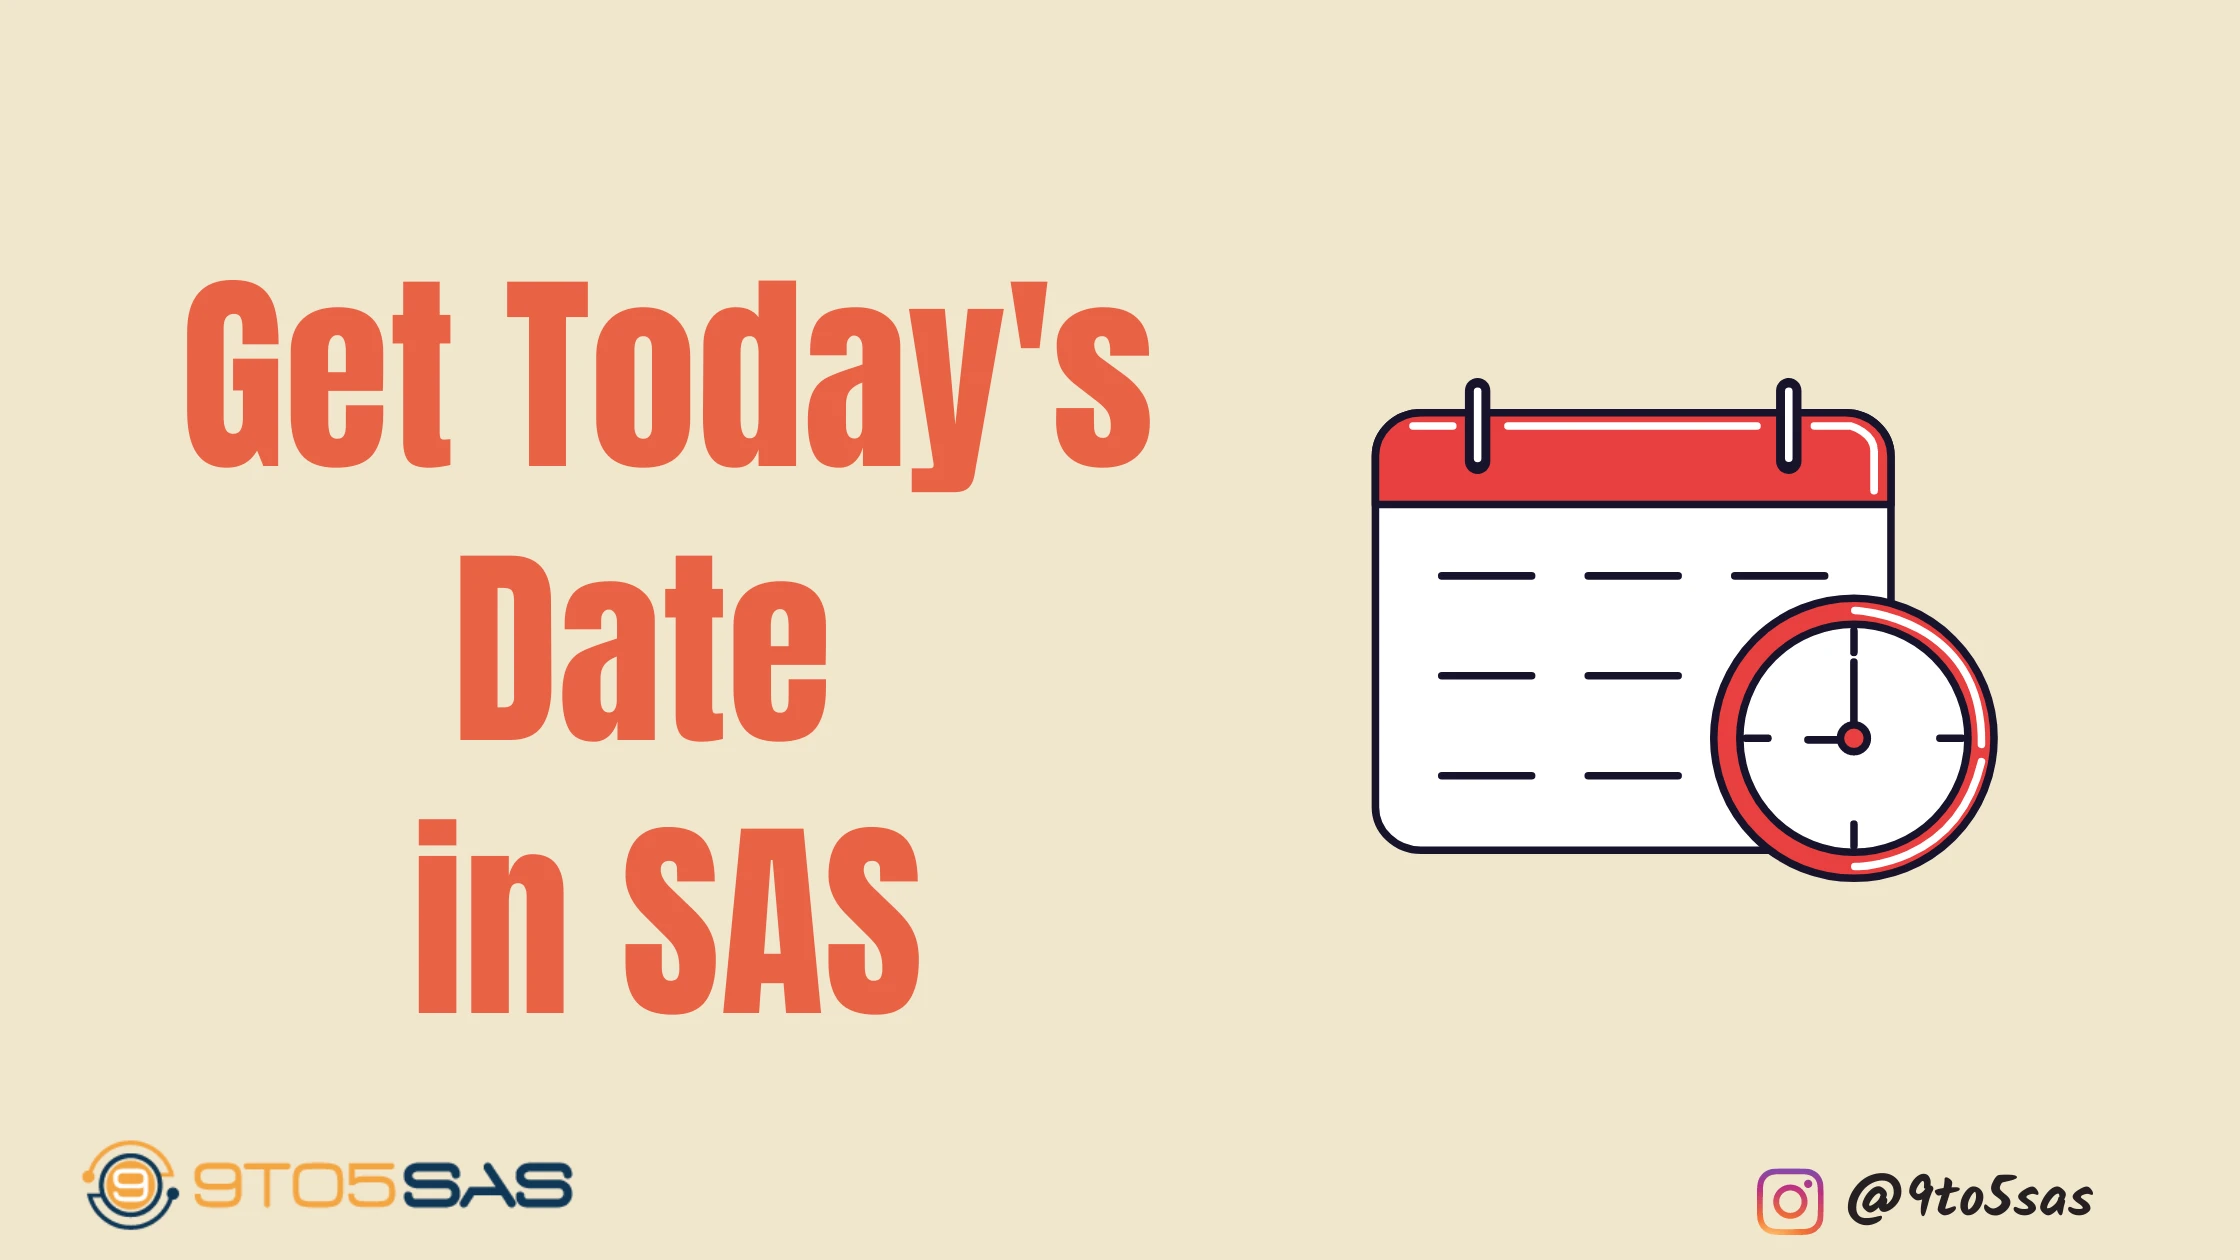 How to get today’s date in SAS?